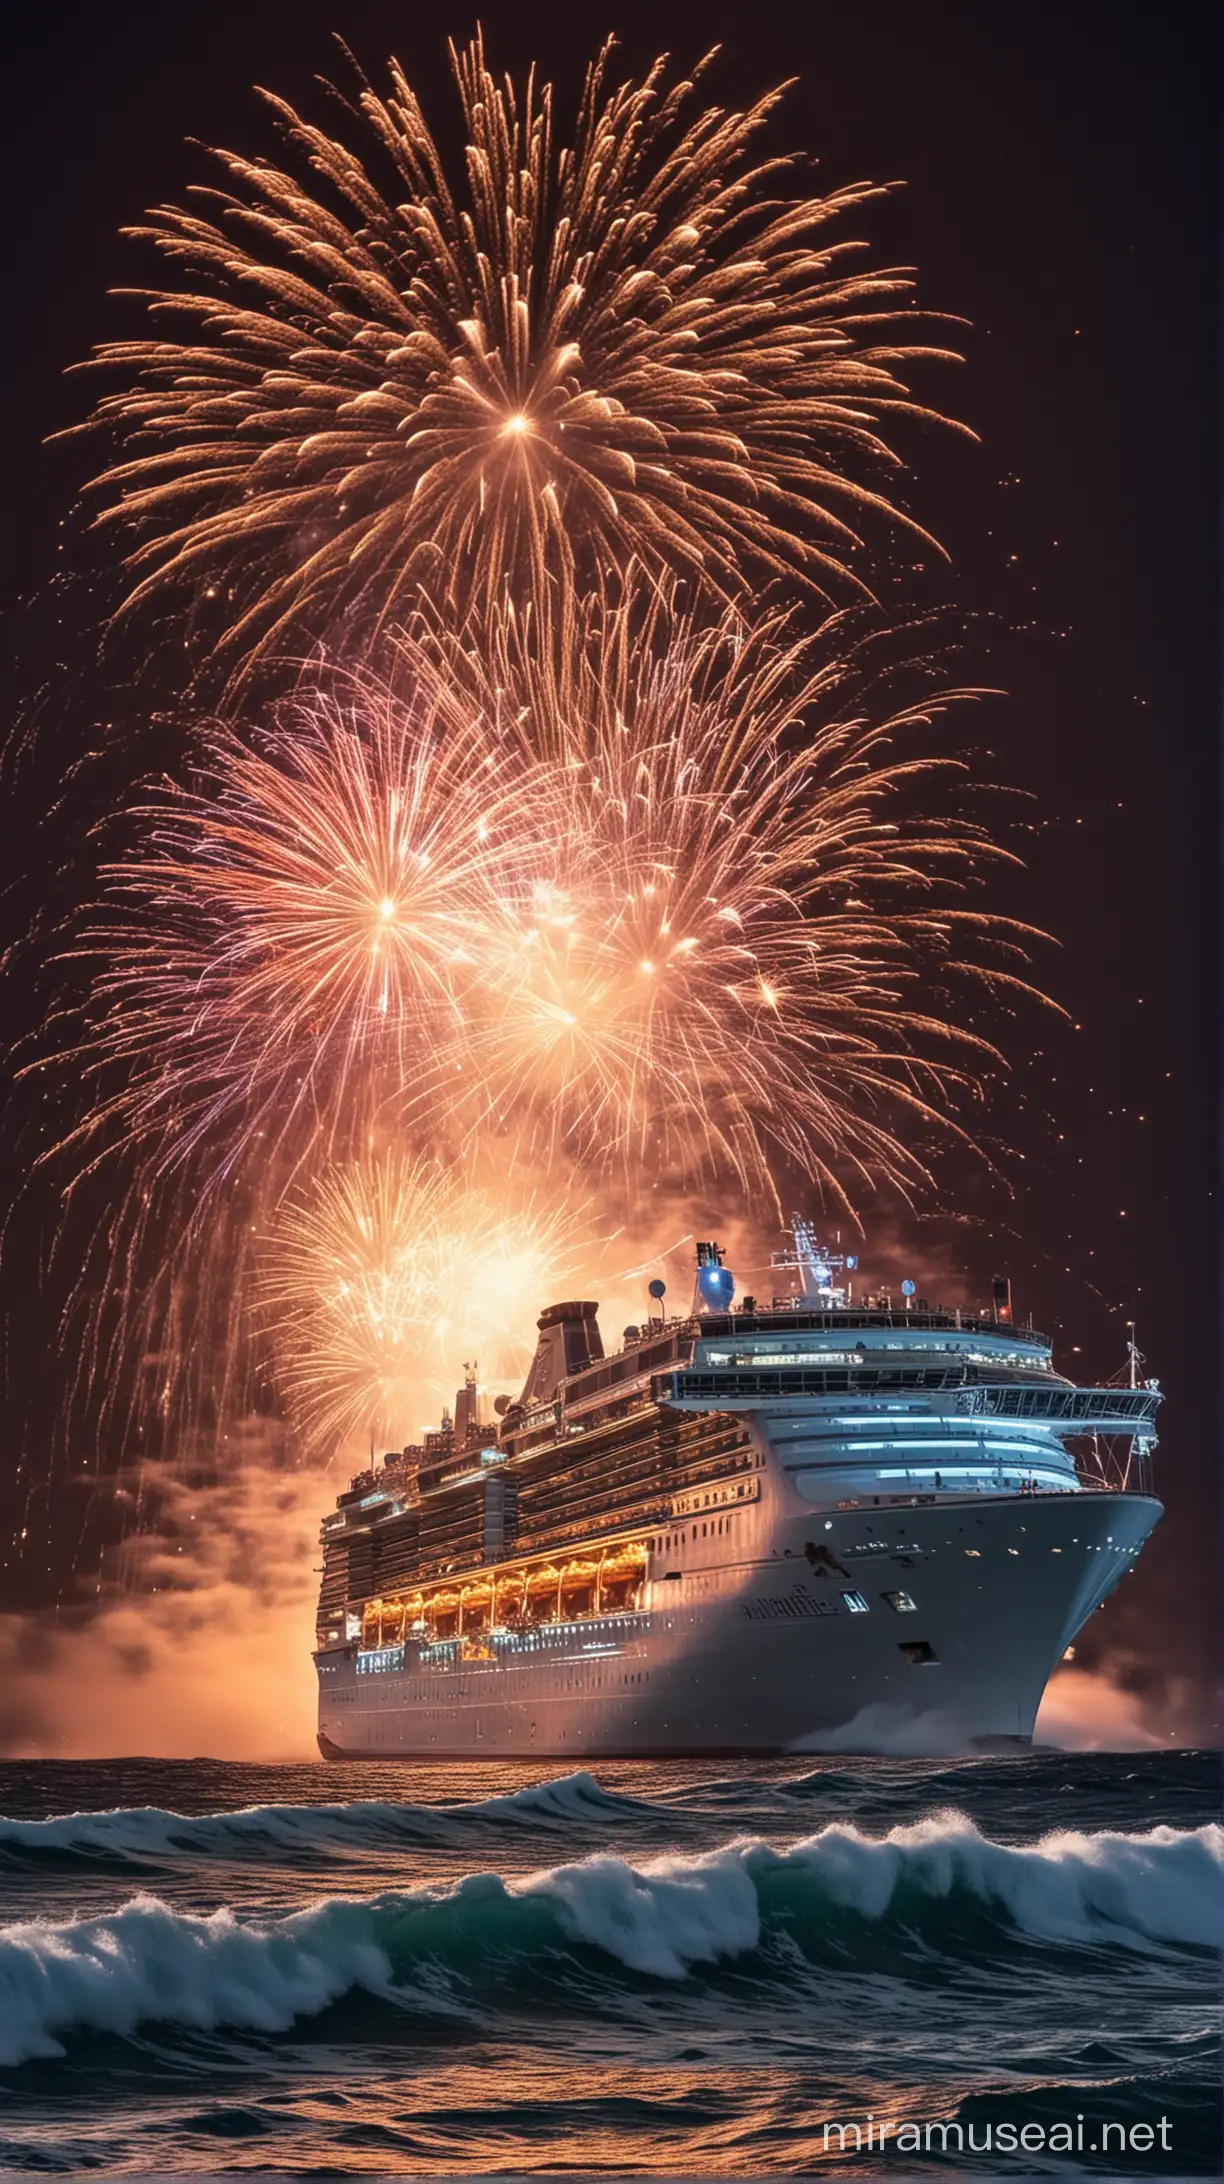 Nighttime Celebration on a Cruise Ship with Fireworks Over the Sea